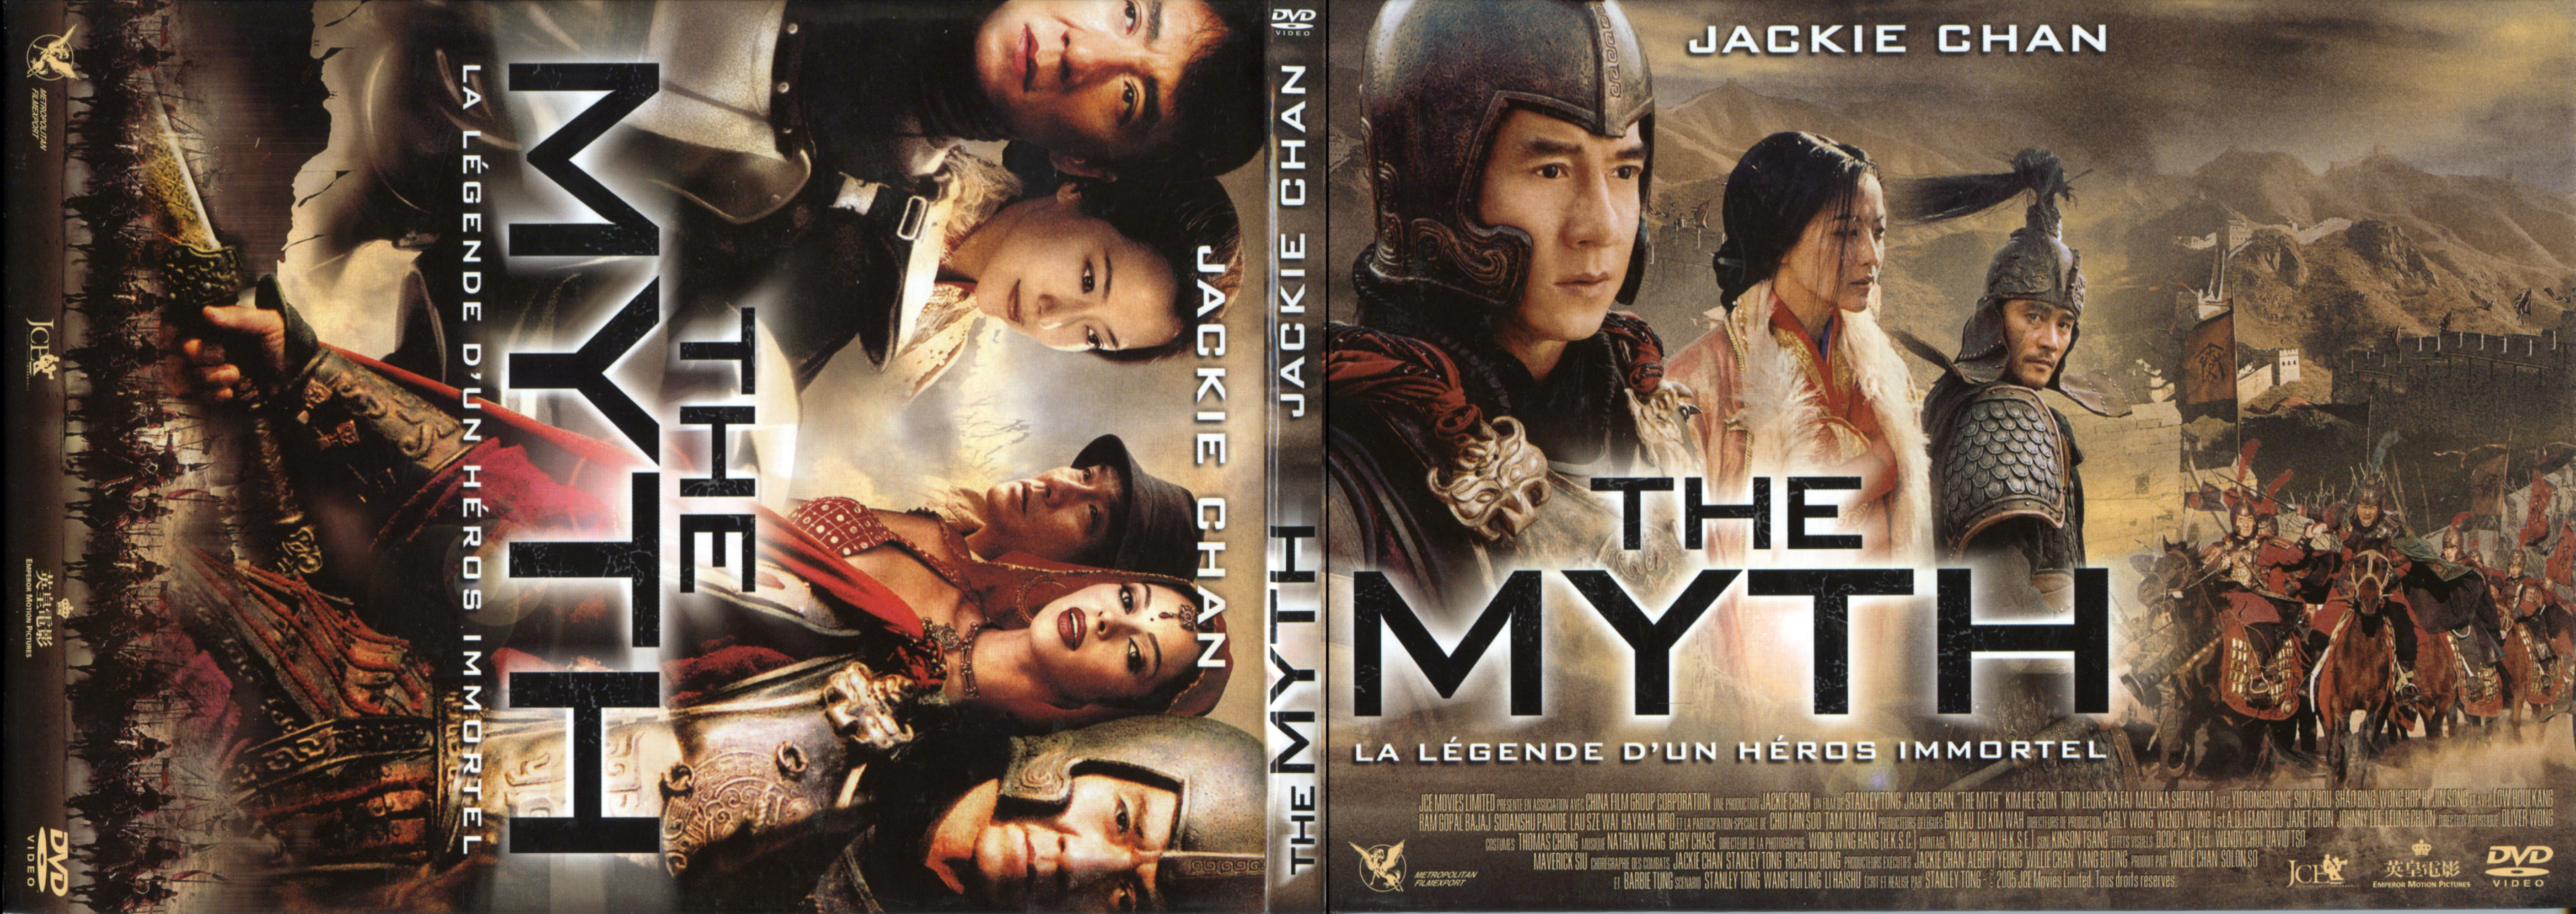 Jaquette DVD The myth (Jackie Chan) v4